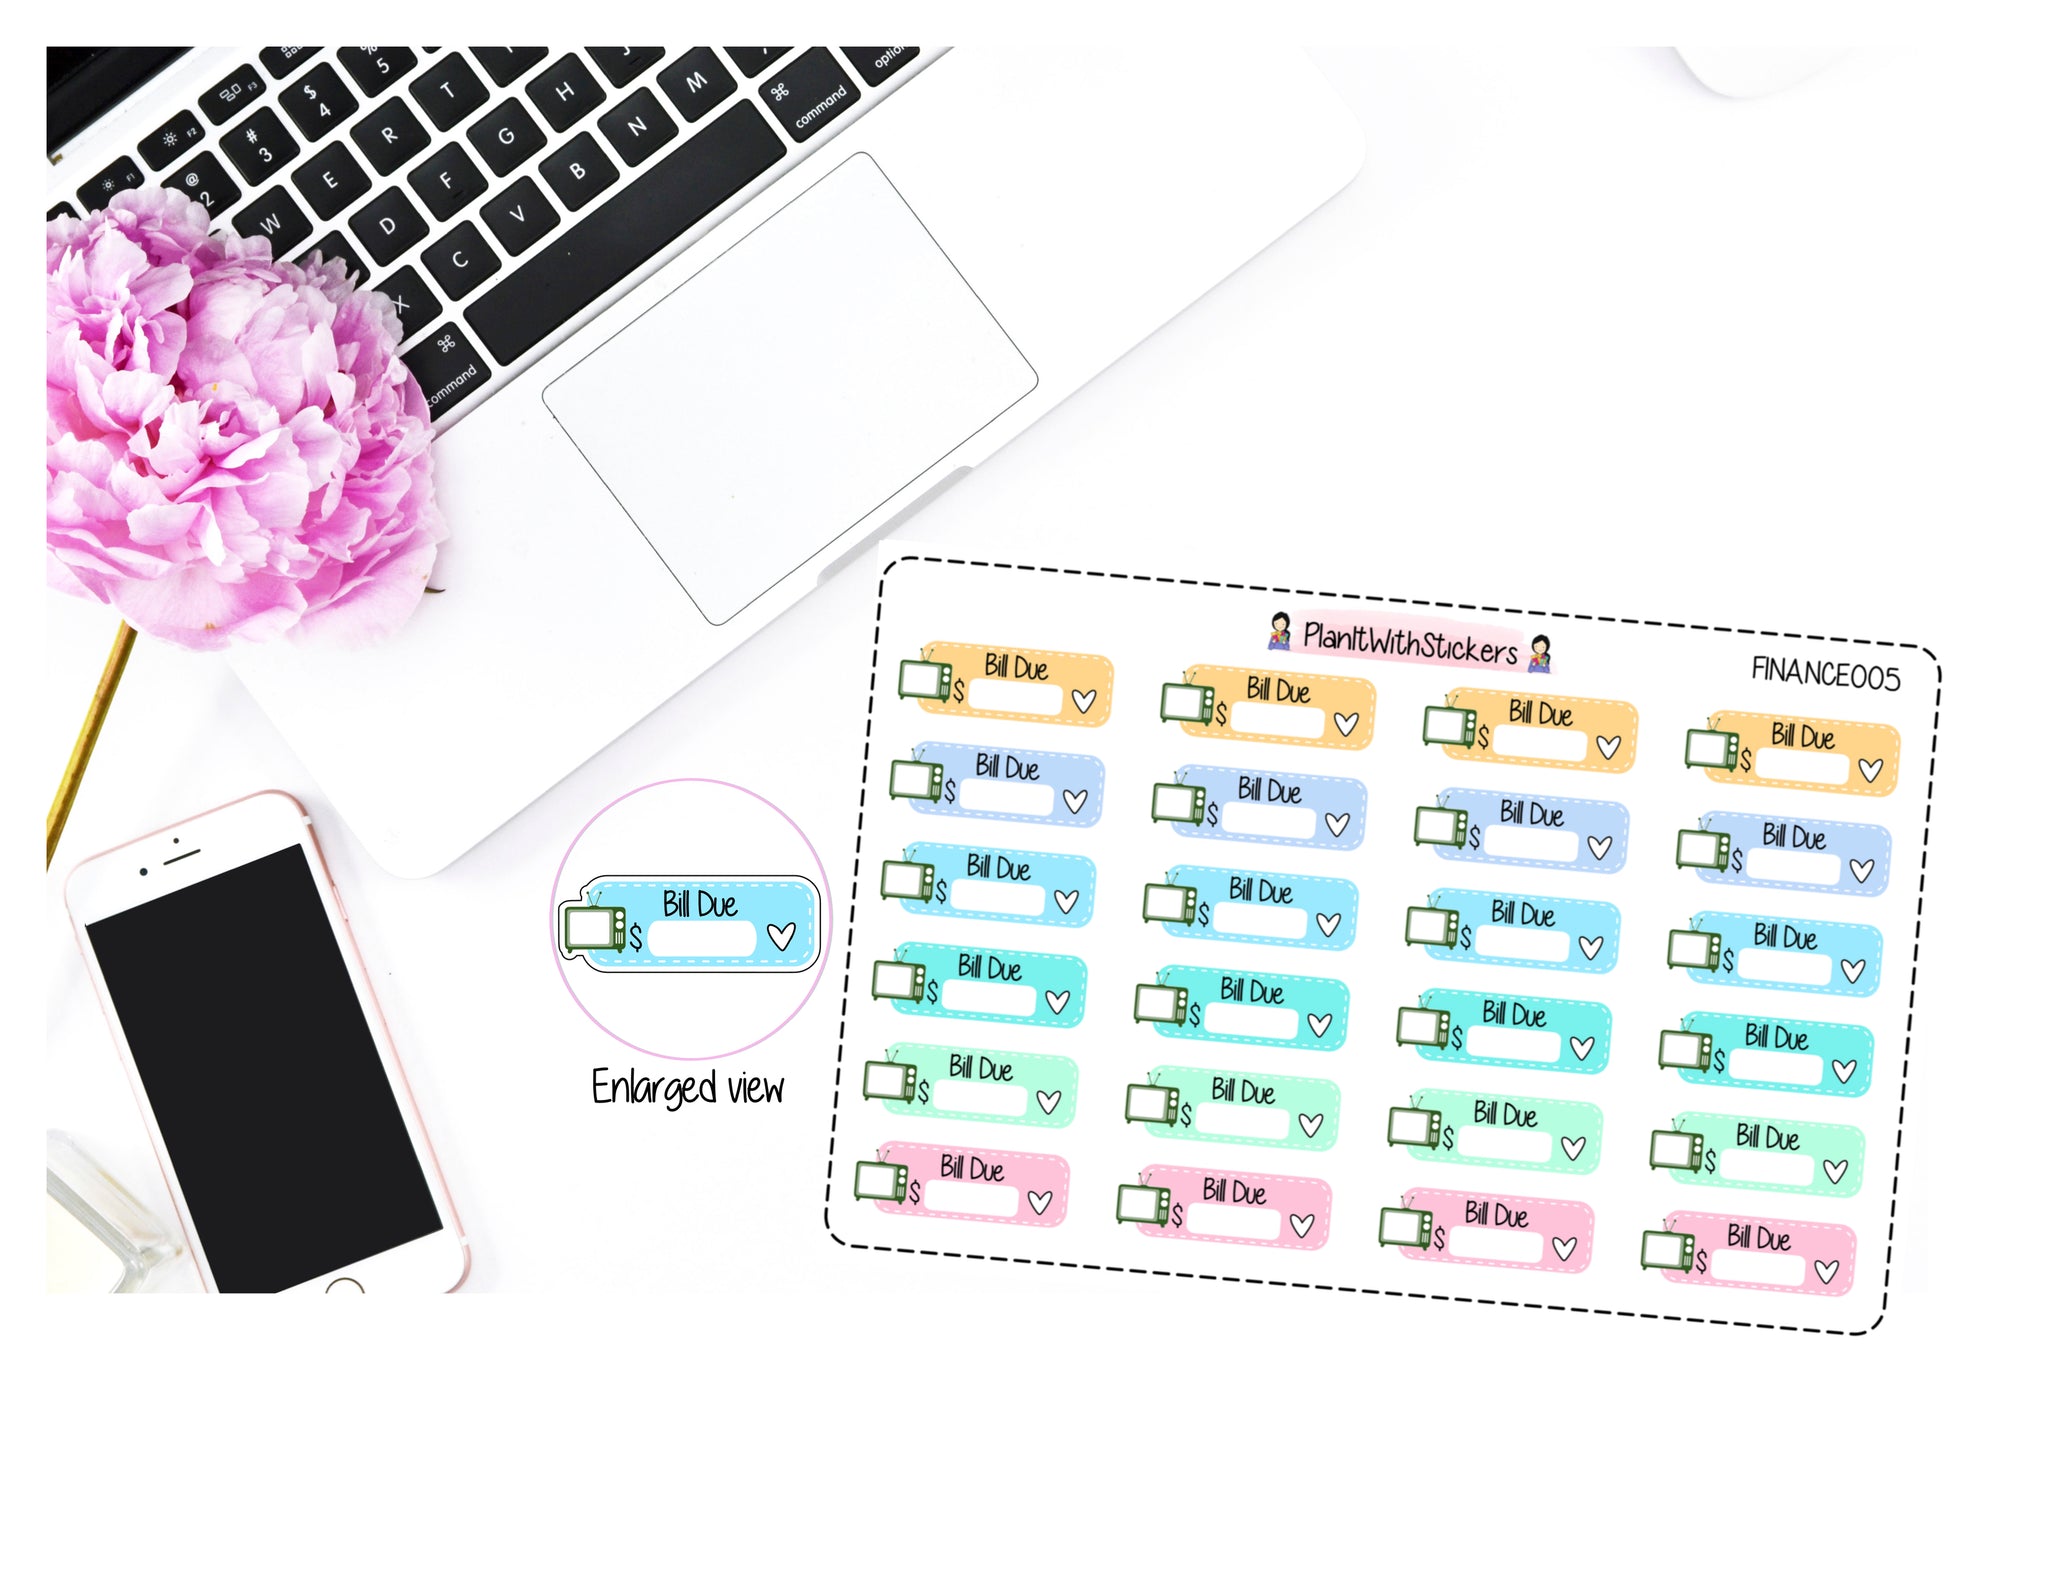 Cable Bill Due Pay Bill Planner Stickers in Pastel Colours for , Plum Paper, Recollections, and similar planners